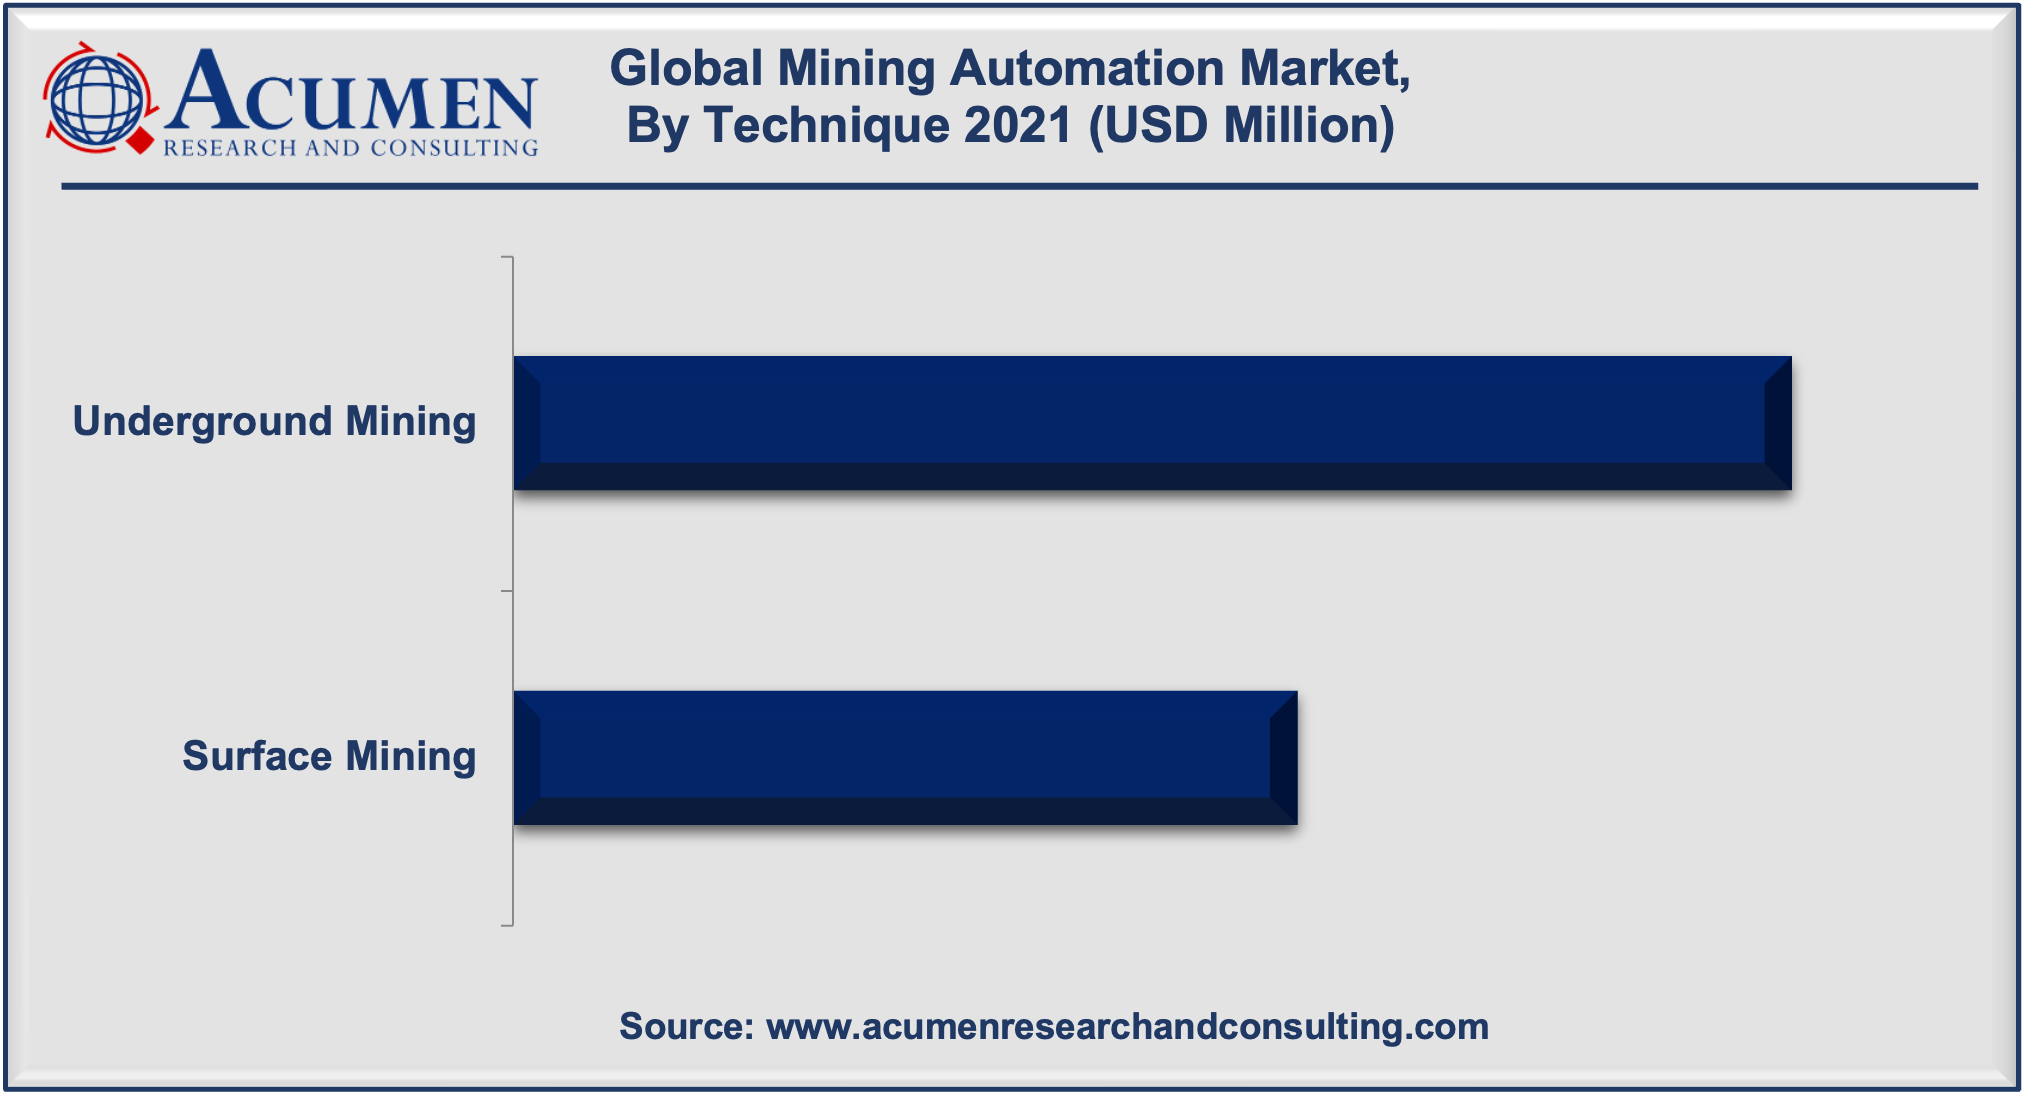 Mining Automation Market Size is estimated to reach USD 6,416 by 2030, with a significant CAGR of 7.8%